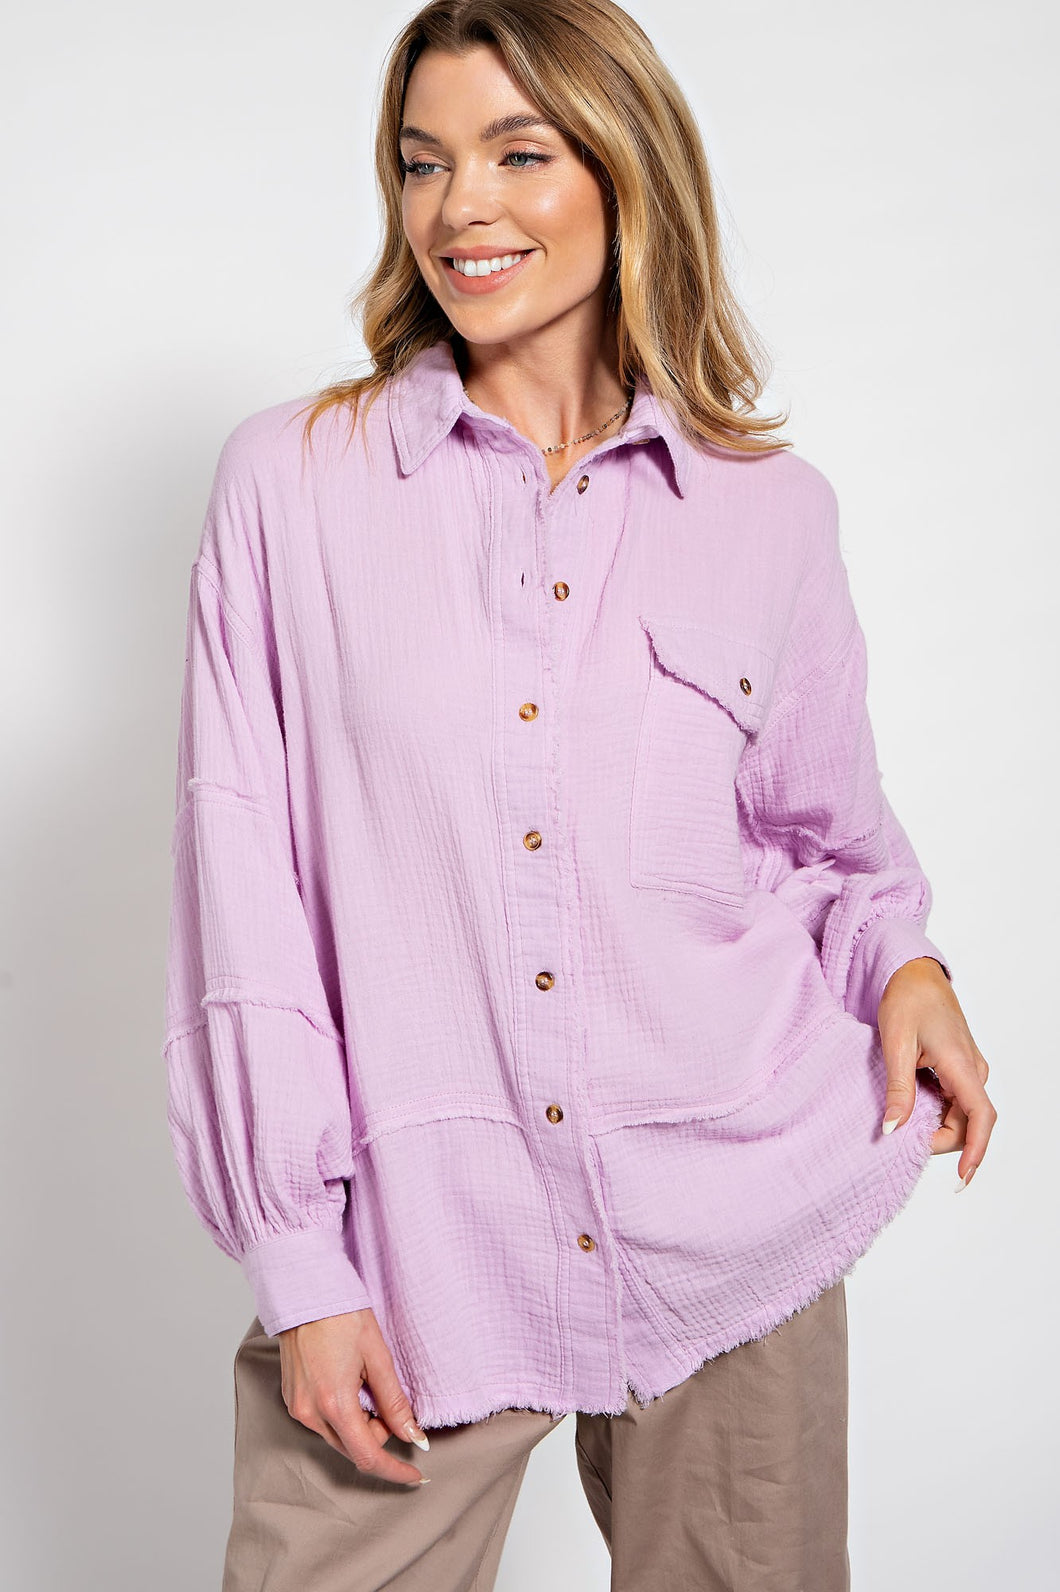 Easel Loose Fit Gauze Top in Lilac Pink Shirts & Tops Easel   